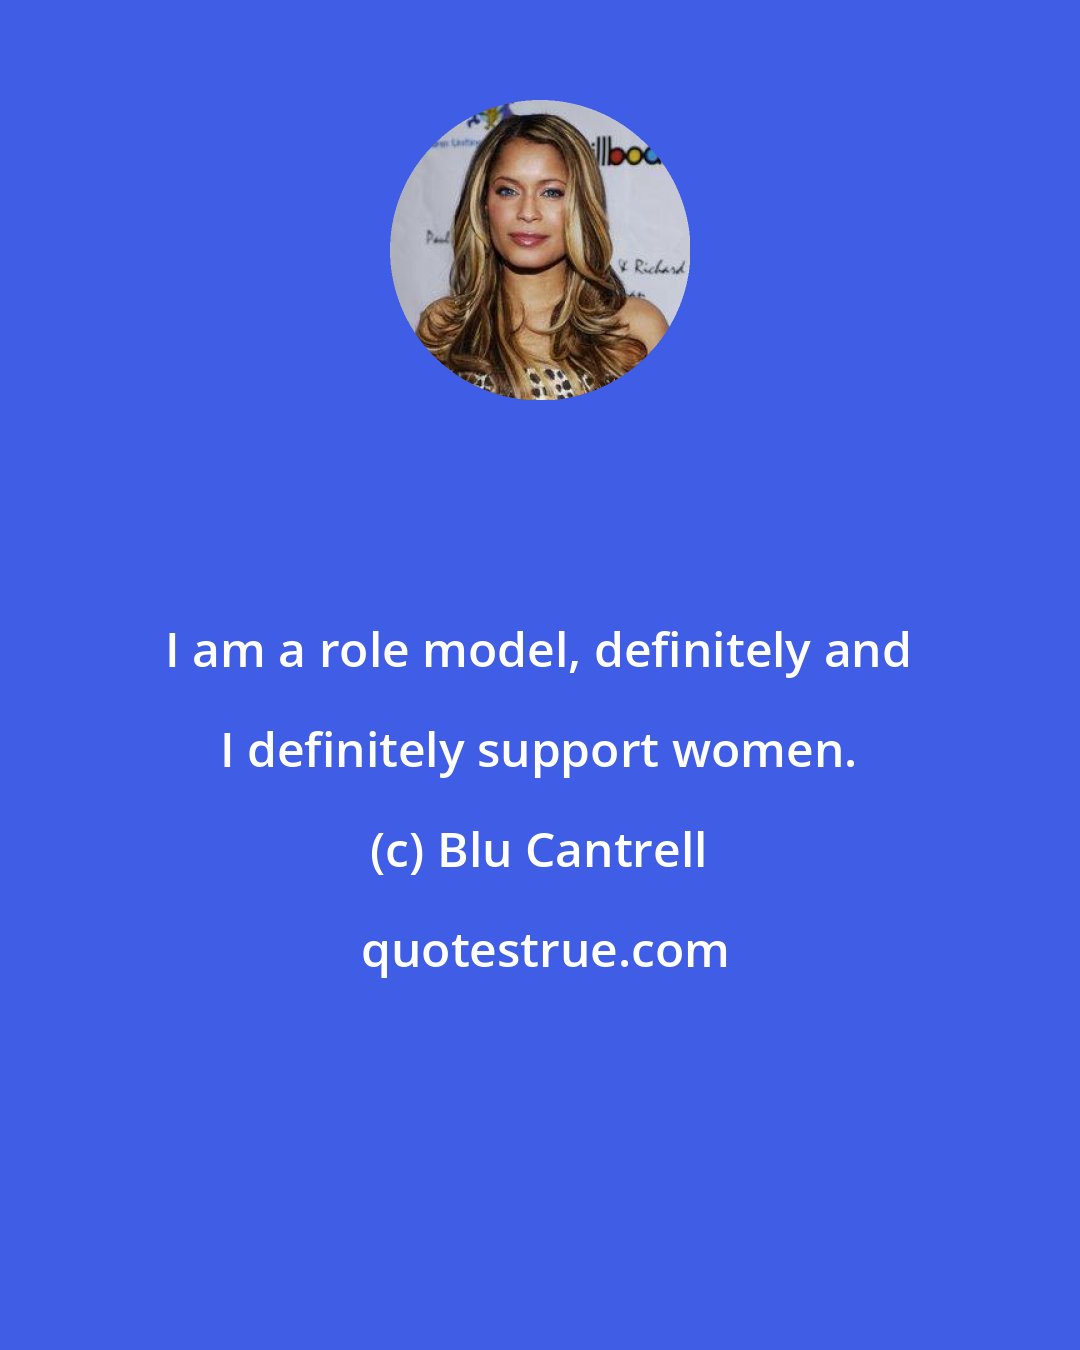 Blu Cantrell: I am a role model, definitely and I definitely support women.